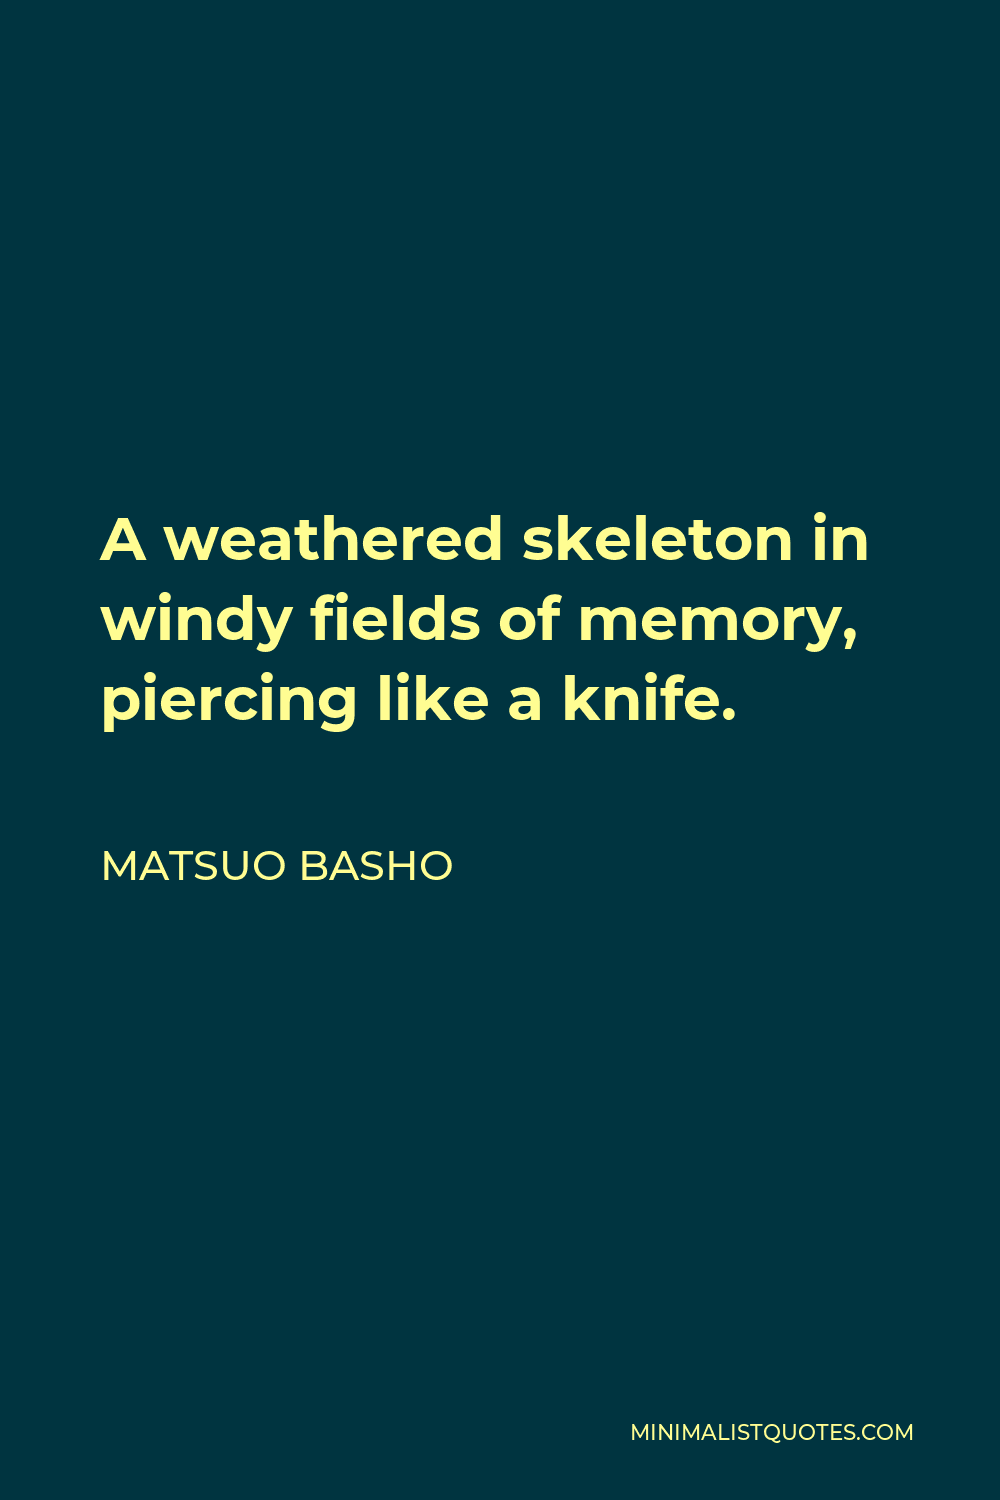 Matsuo Basho Quote - A weathered skeleton in windy fields of memory, piercing like a knife.